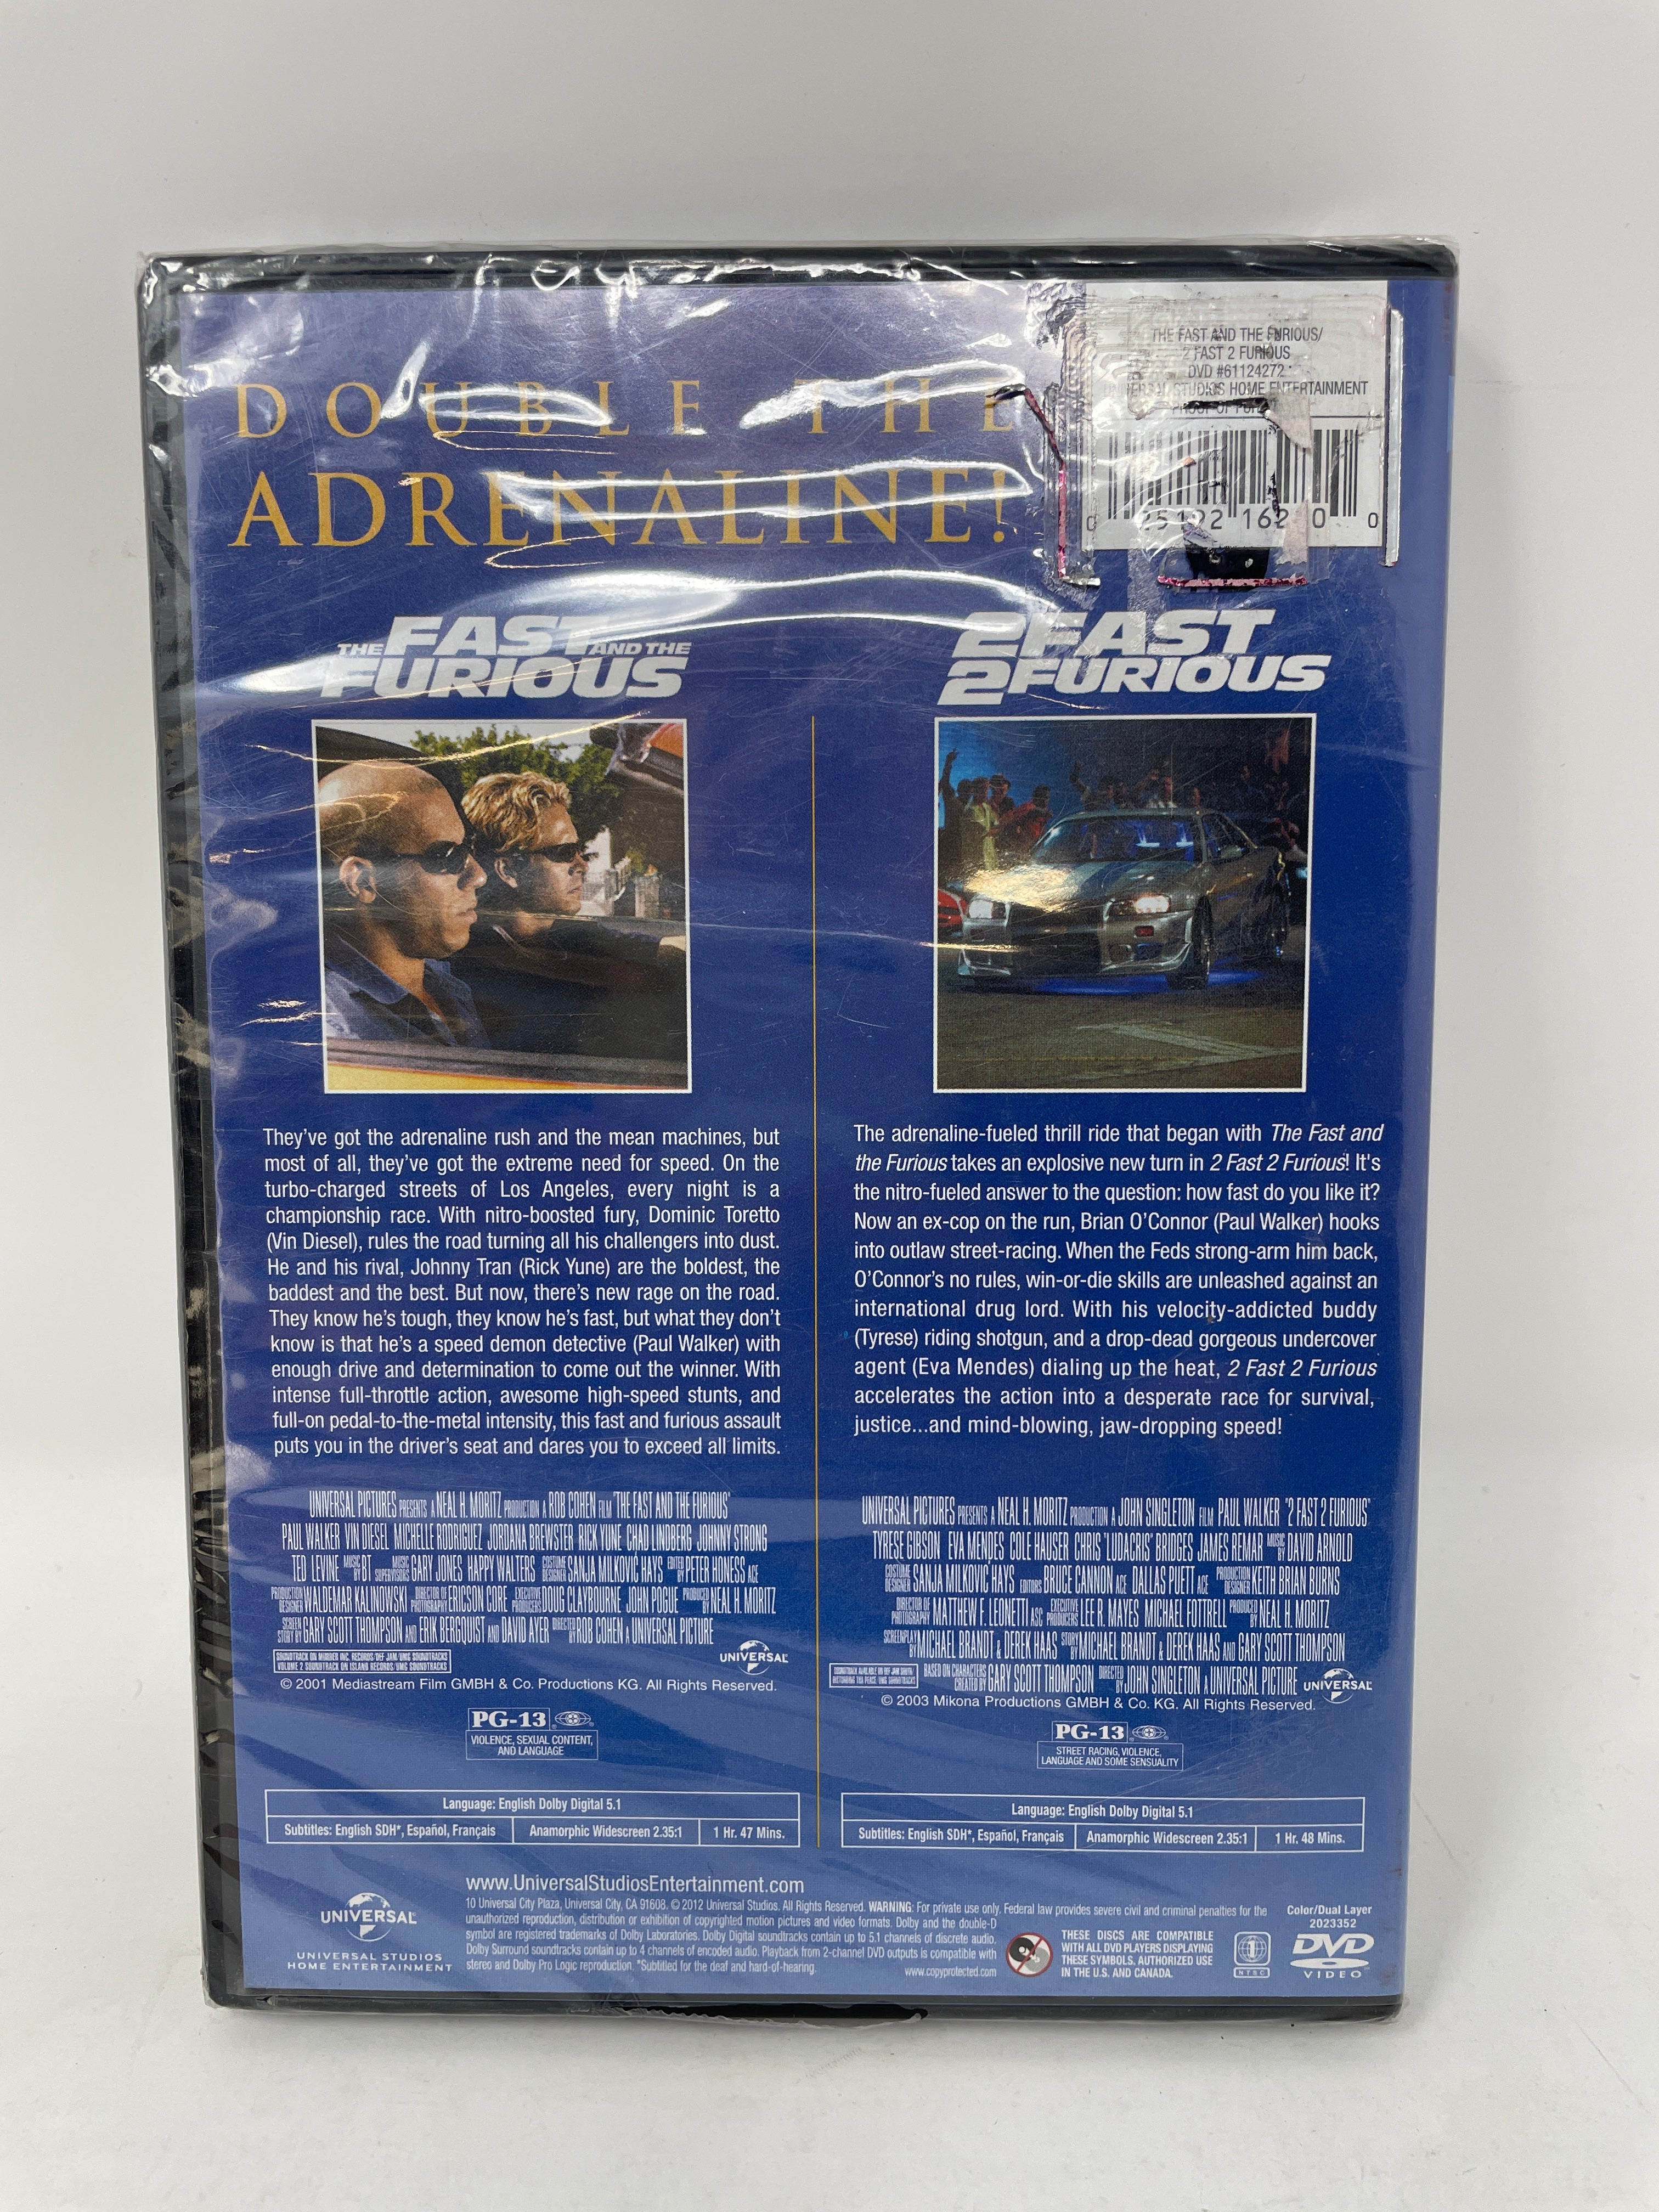 The Fast and the Furious / 2 Fast 2 Furious Double Feature - DVD